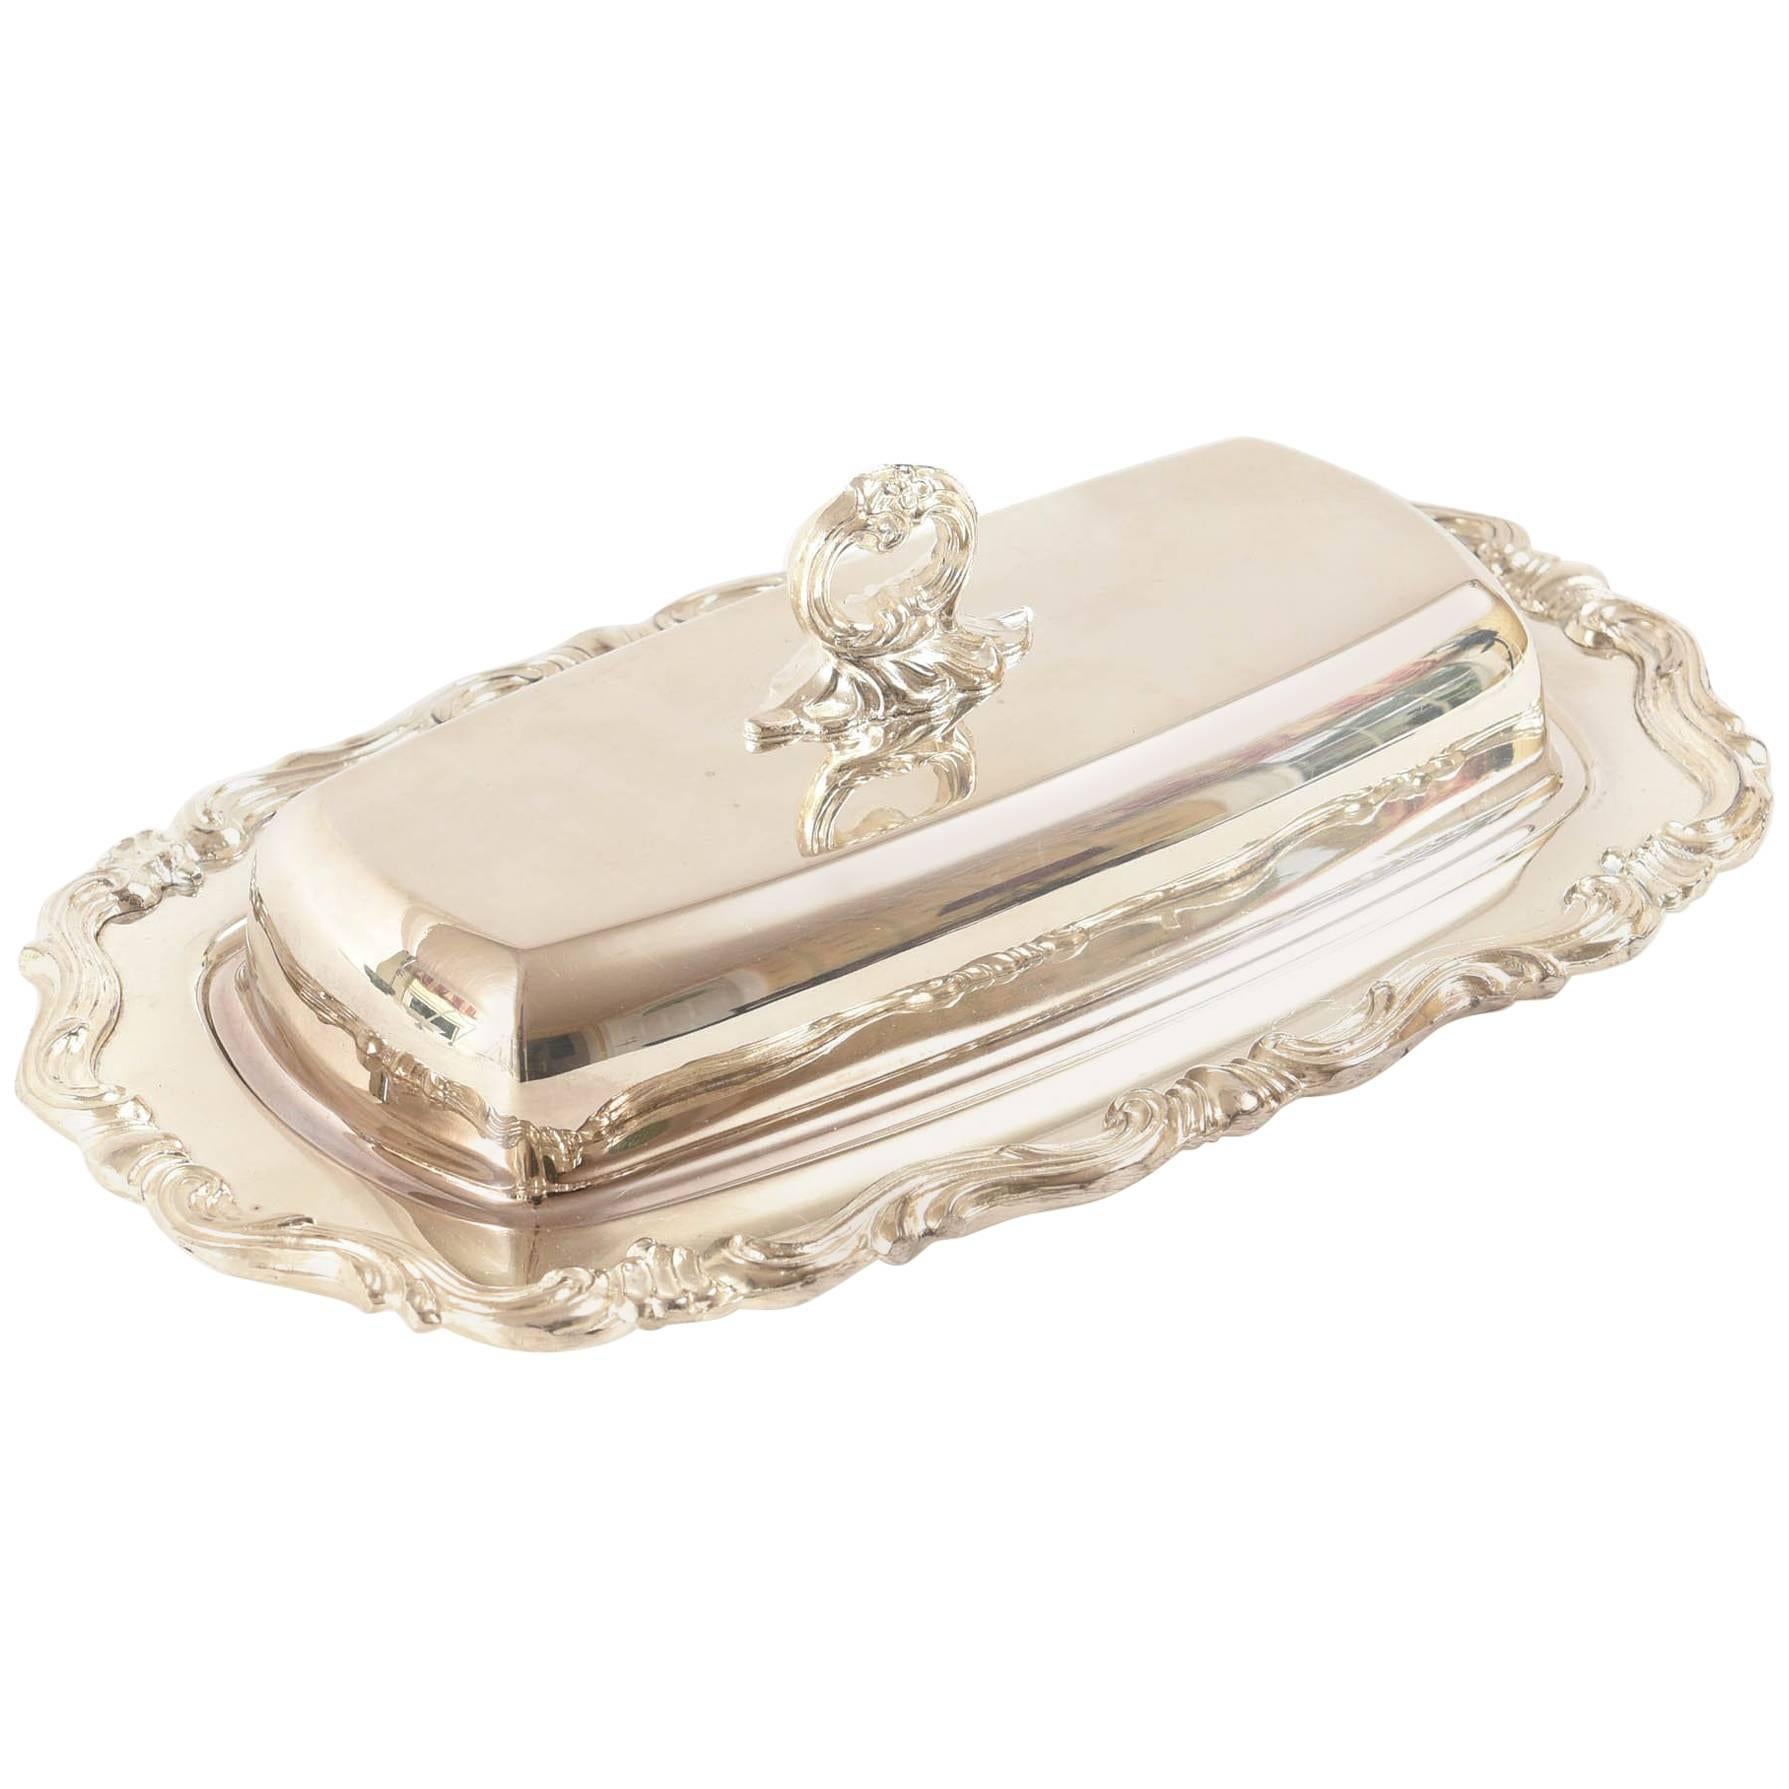 Charming Silver Plated Butter Dish, Vintage